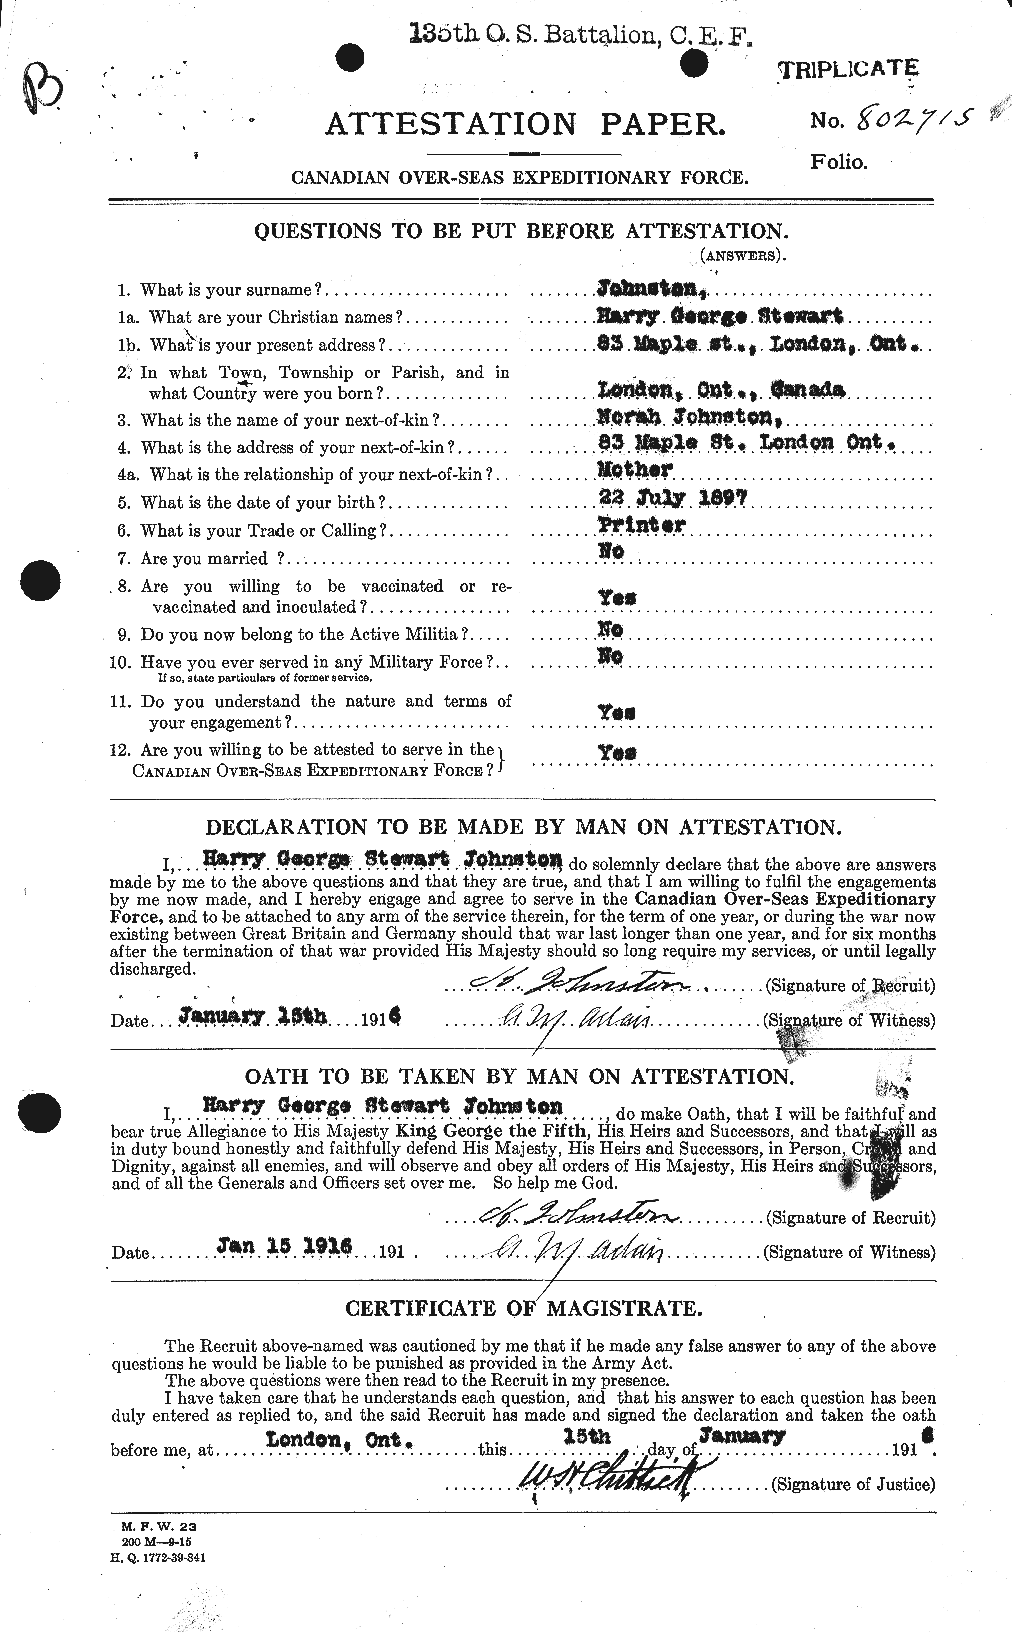 Personnel Records of the First World War - CEF 419518a